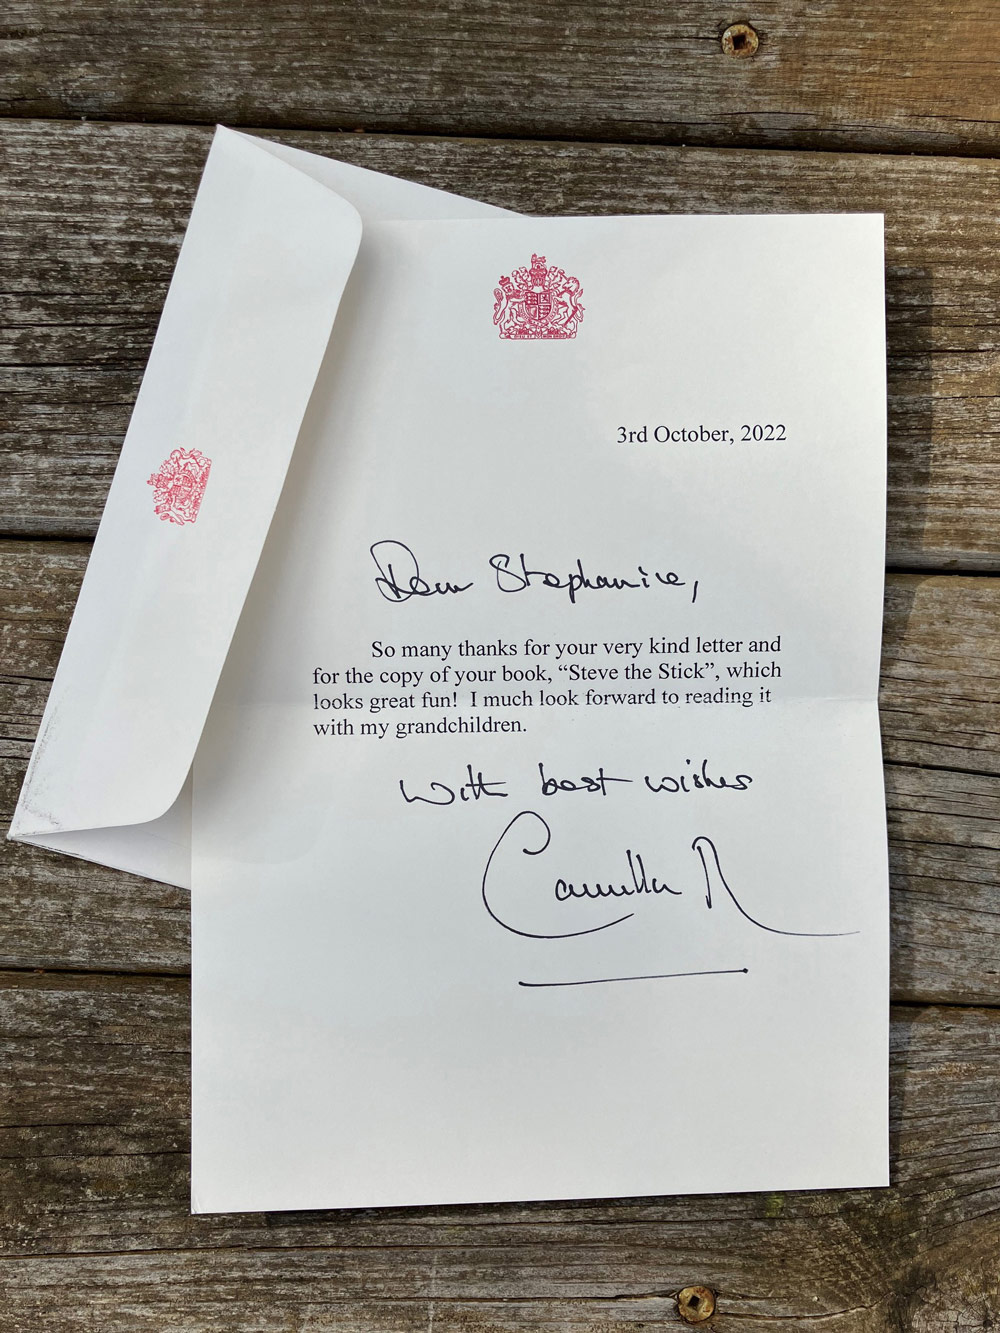 The letter Steph received from HRH Camilla Queen Consort